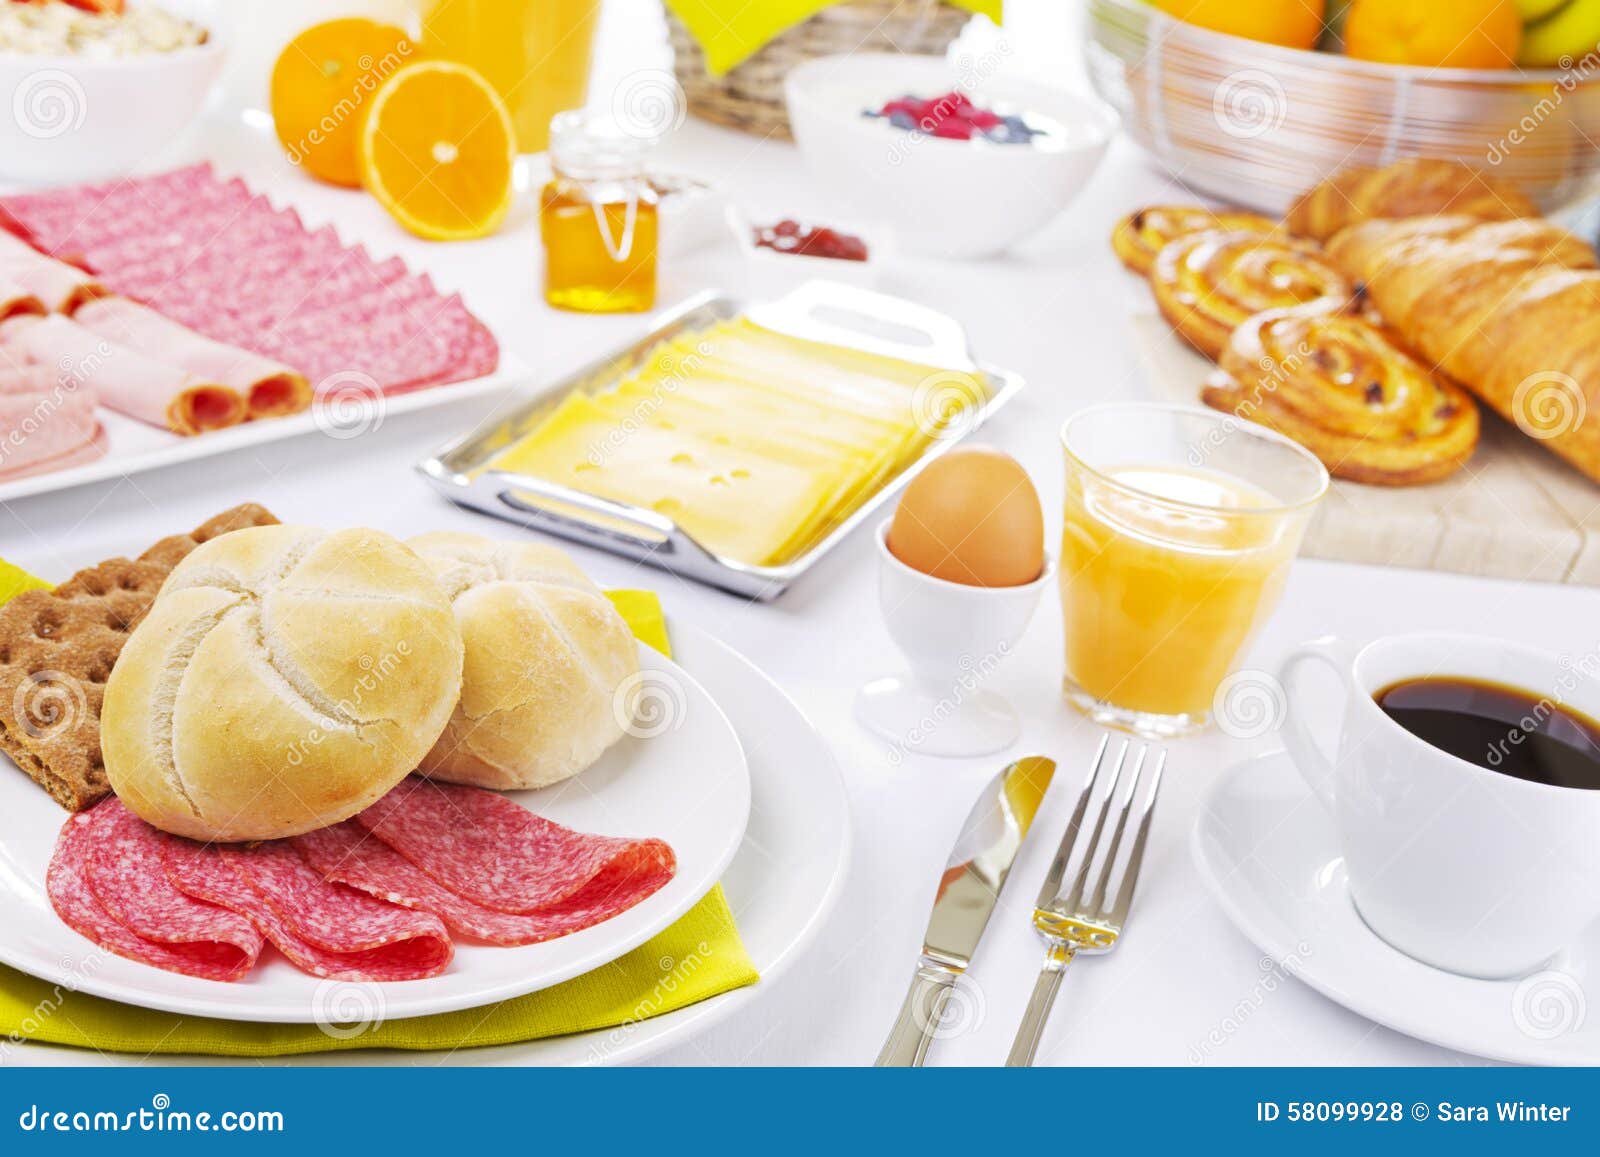 Table Full with Continental Breakfast Items Stock Photo - Image of ...